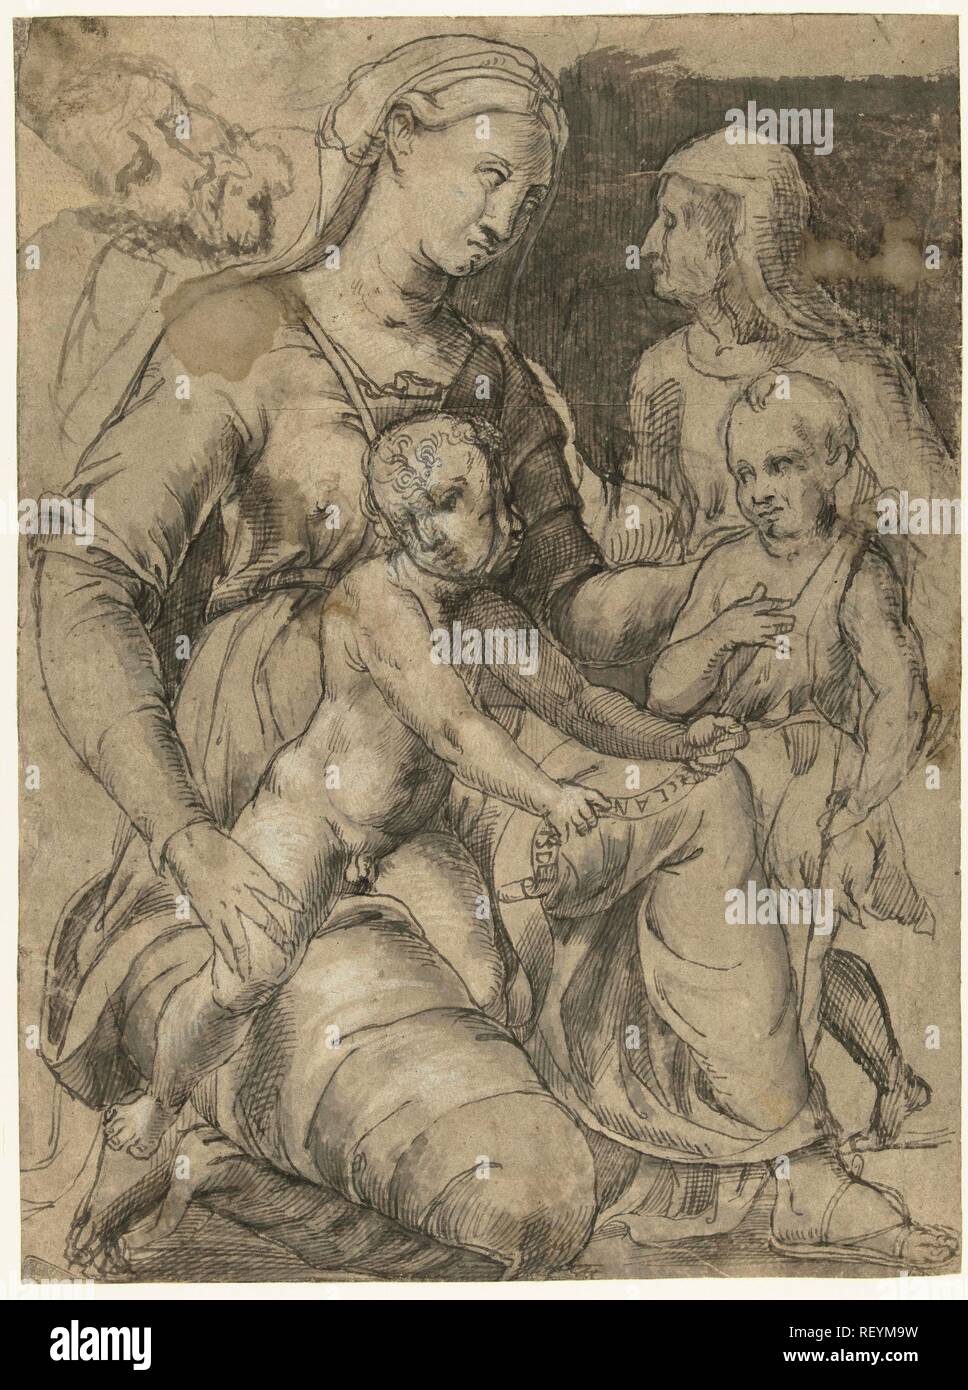 Holy family with John the Baptist and Elizabeth. Artist: Lambert Lombard (possibly). Draughtsman: anonymous. Dating: 1540 - 1560. Measurements: h 280 mm × w 208 mm. Museum: Rijksmuseum, Amsterdam. Stock Photo